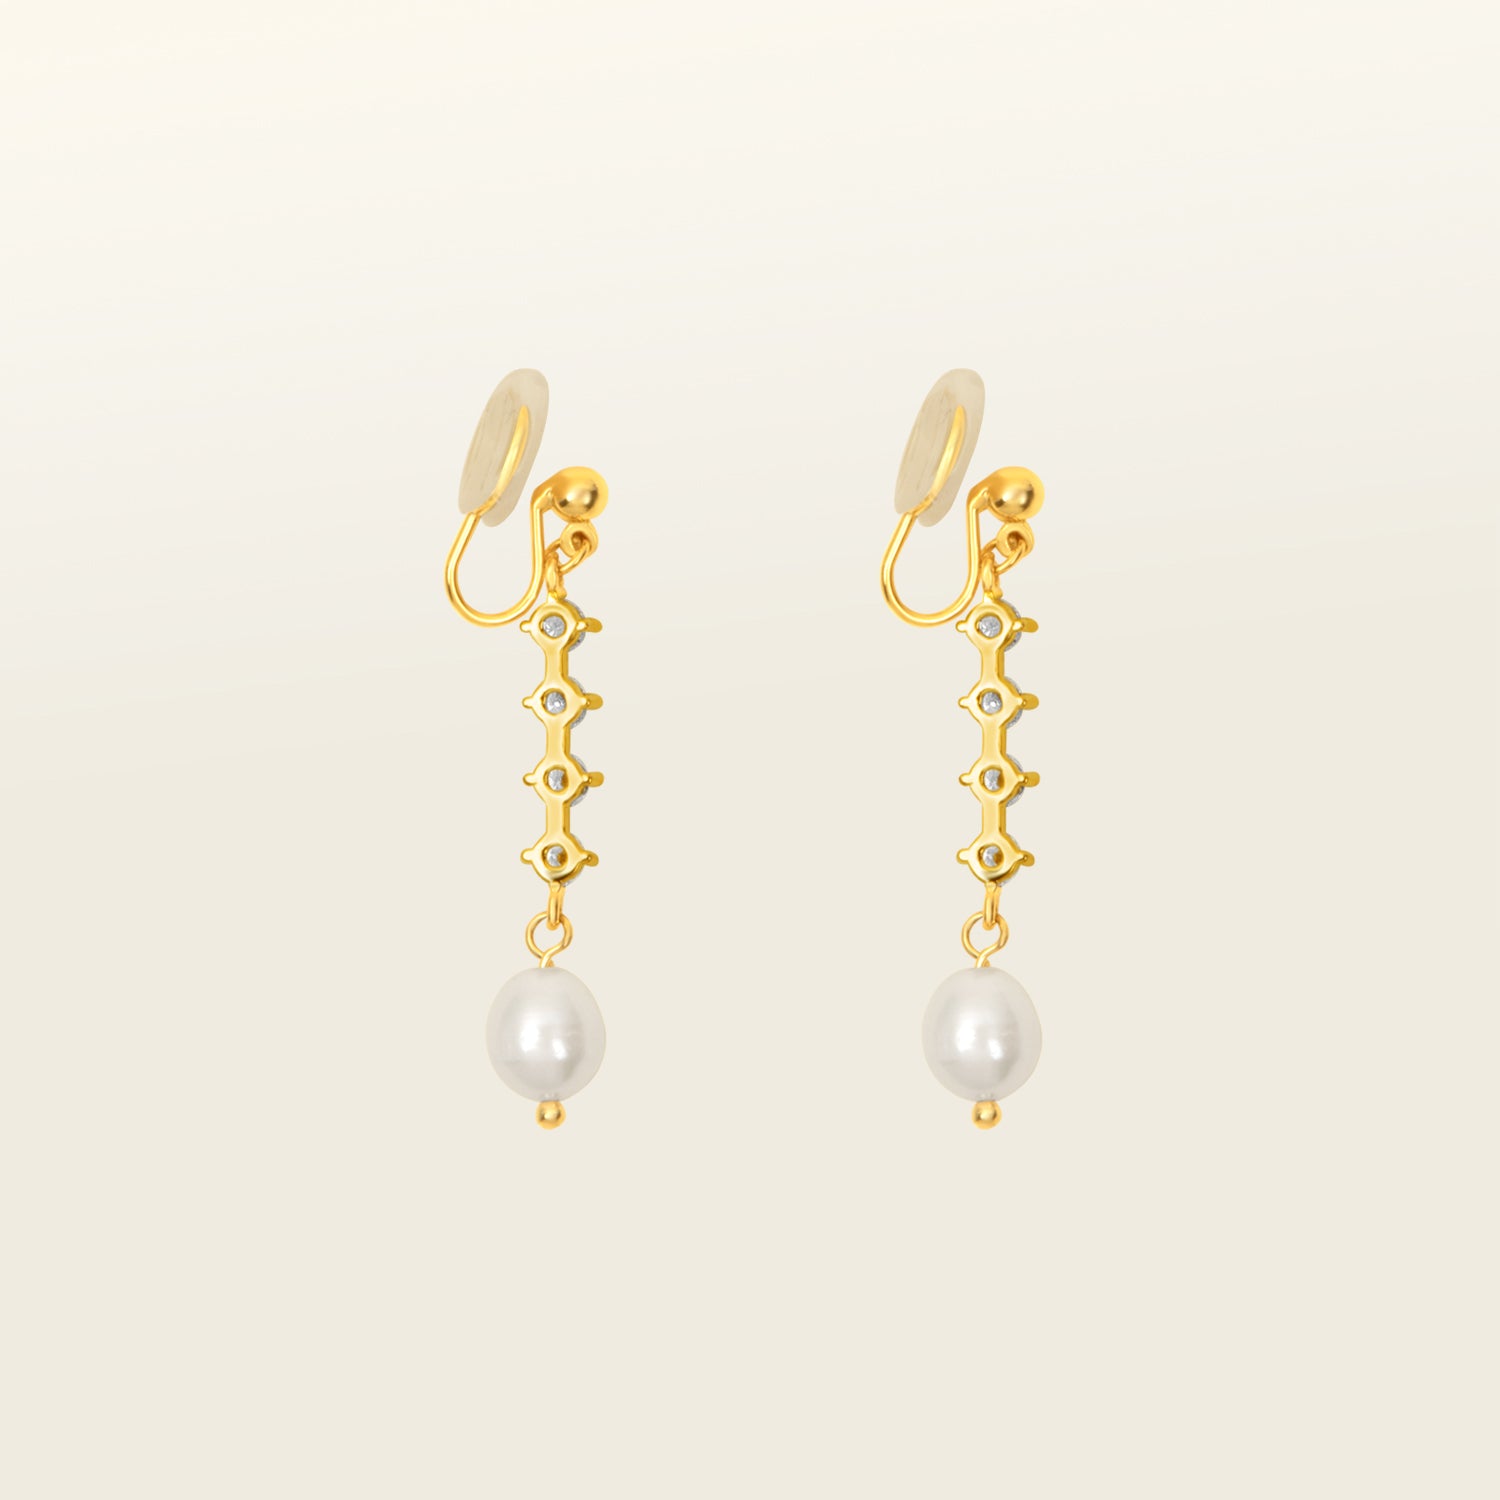 Image of the Sophia Clip On Earrings are designed for thick/large ears and sensitive ears alike. These earrings feature mosquito coil clip-on closures with a 24-hour average comfortable wear duration. Their medium secure hold can be adjusted gently by squeezing the padding forward once on the ear. Crafted with 14K gold plating, simulated faux pearl, and cubic zirconia, these earrings are lead/nickel/cadmium free and sold in single pairs.